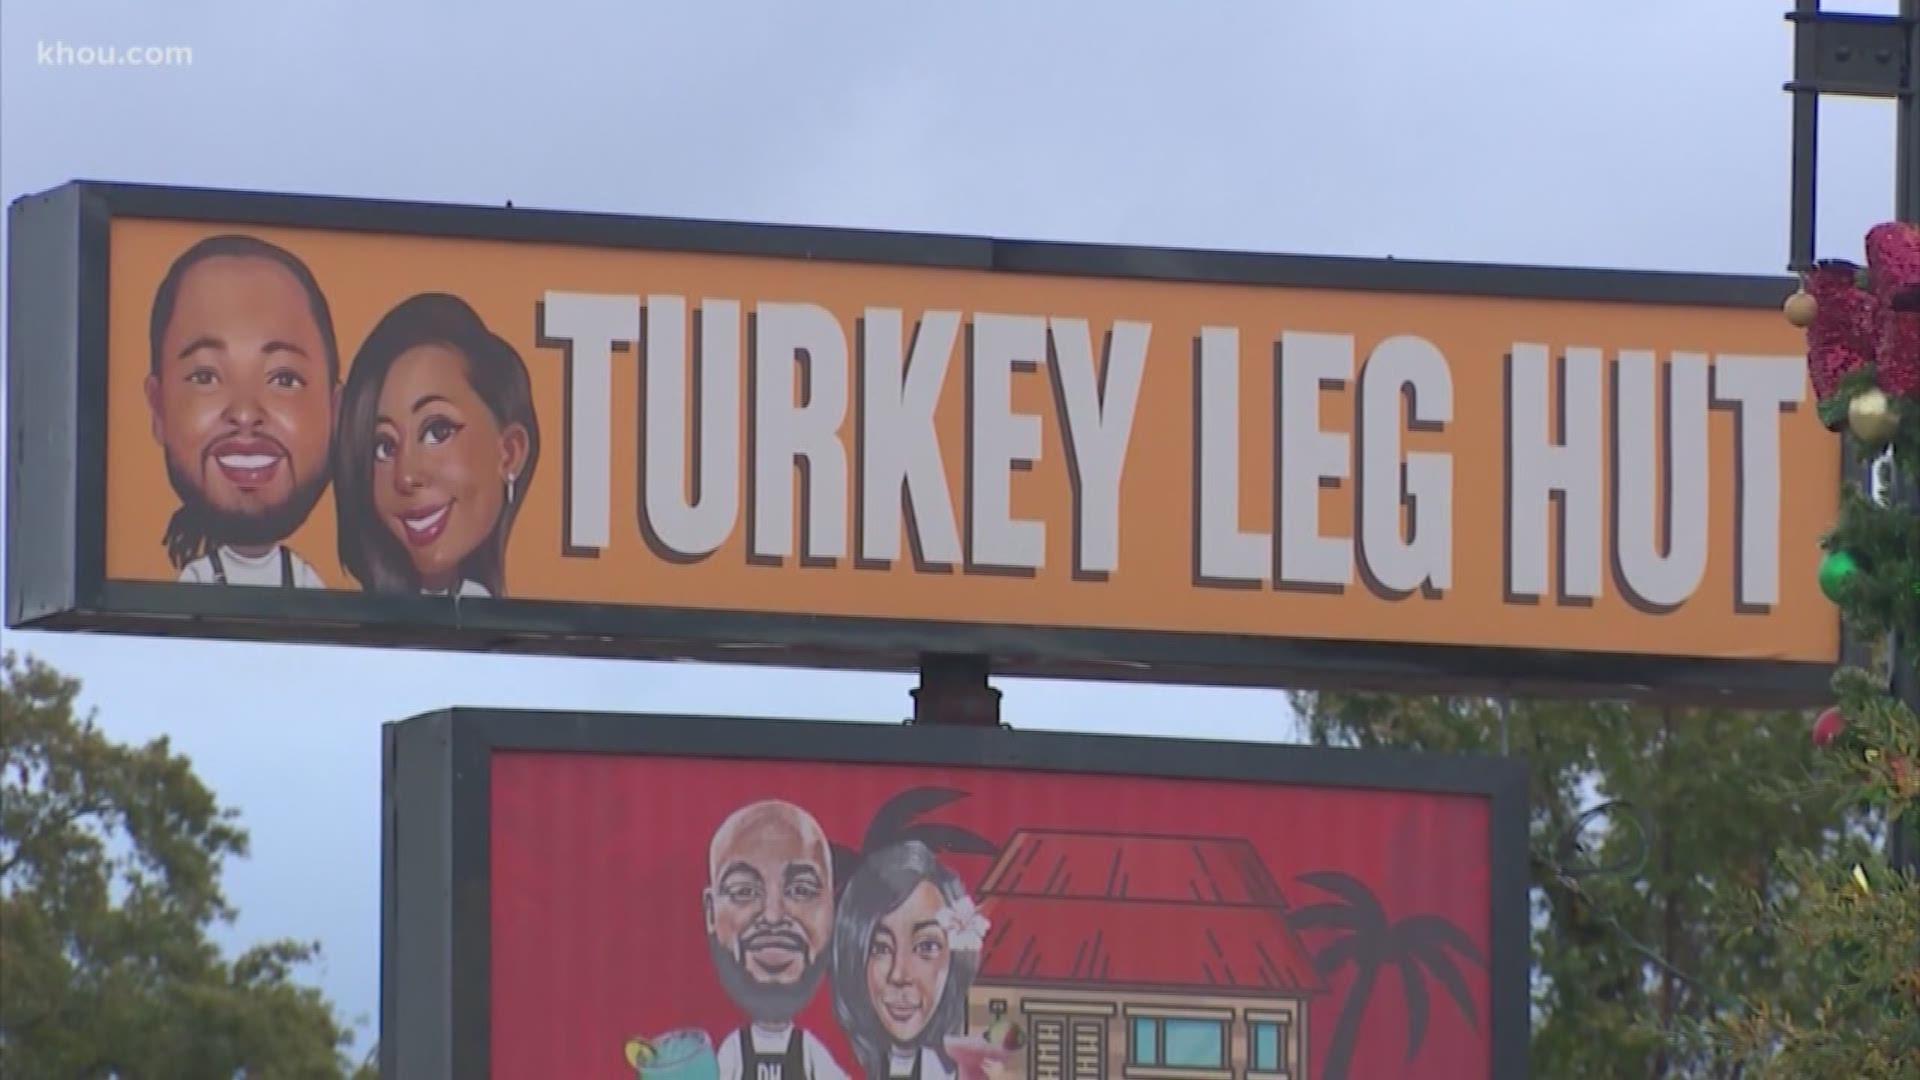 The Turkey Leg Hut will be allowed to stay open through the busy Thanksgiving weekend after a judge lifted a temporary restraining order now.